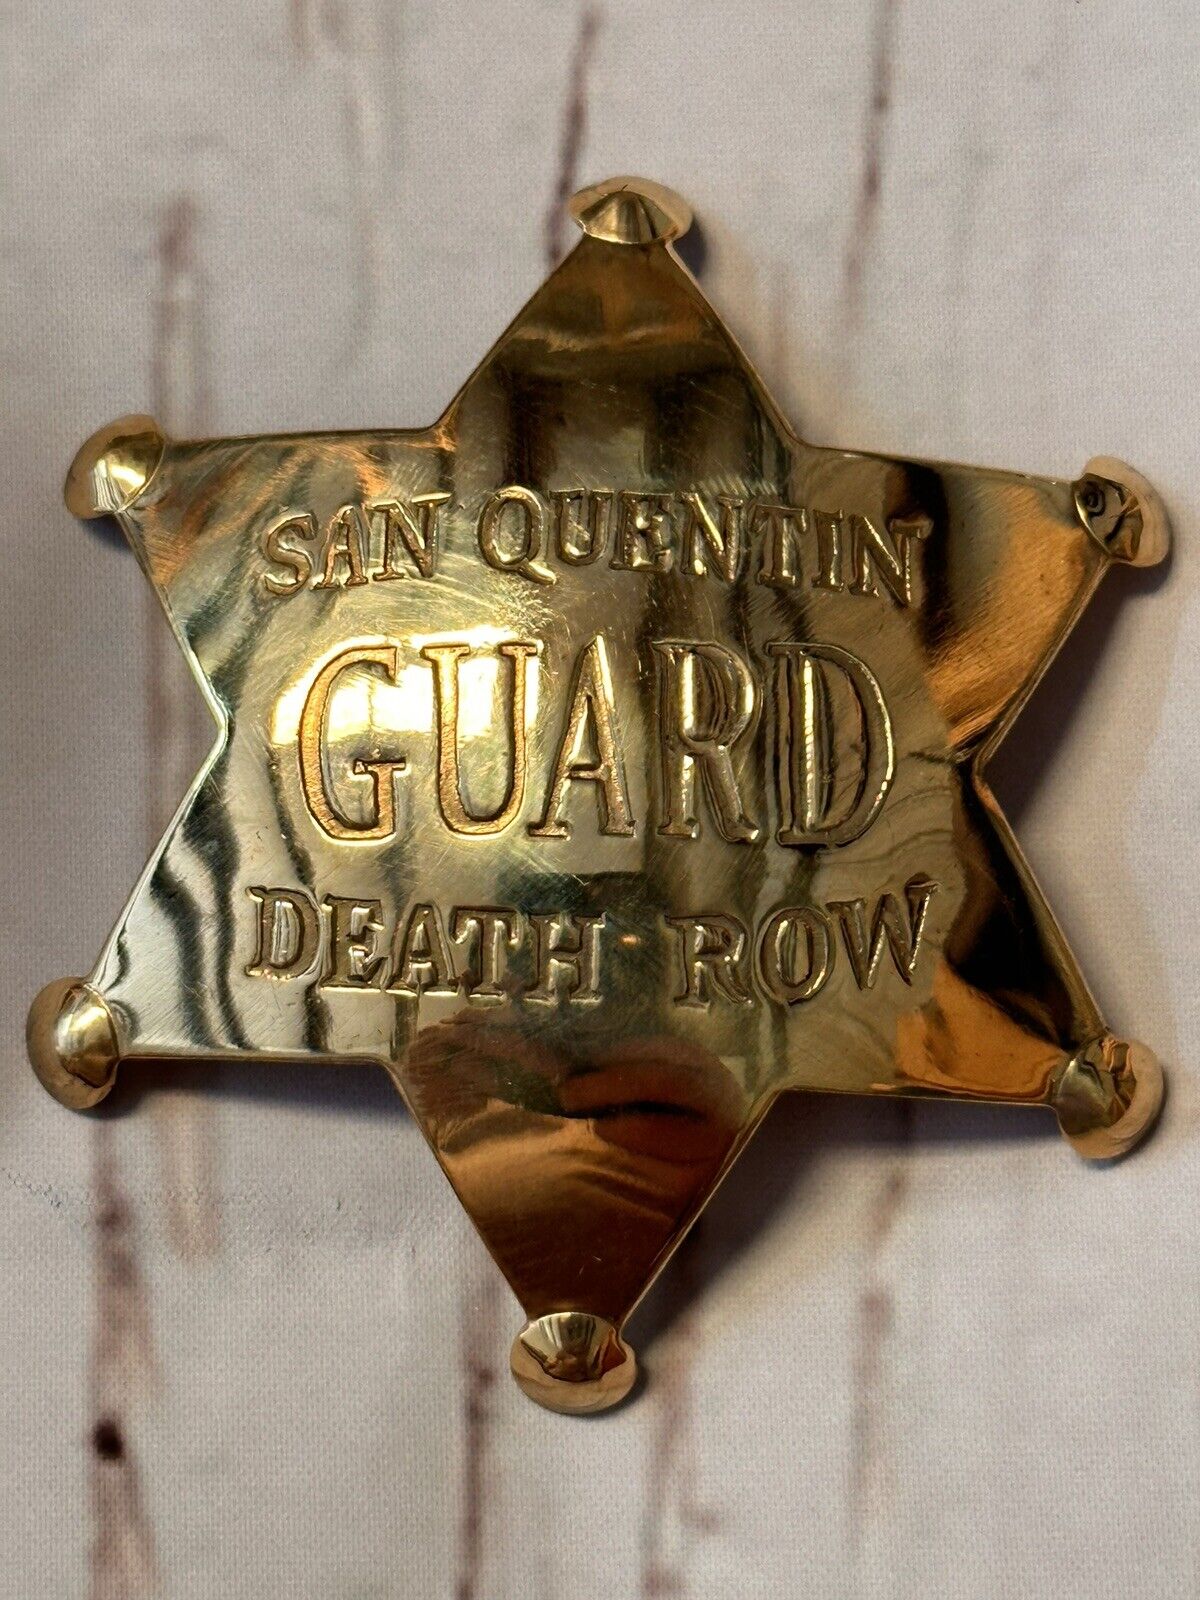 San Quentin Guard Death Row Badge Solid Brass Replica 3 Inch Wide Same Day Ship